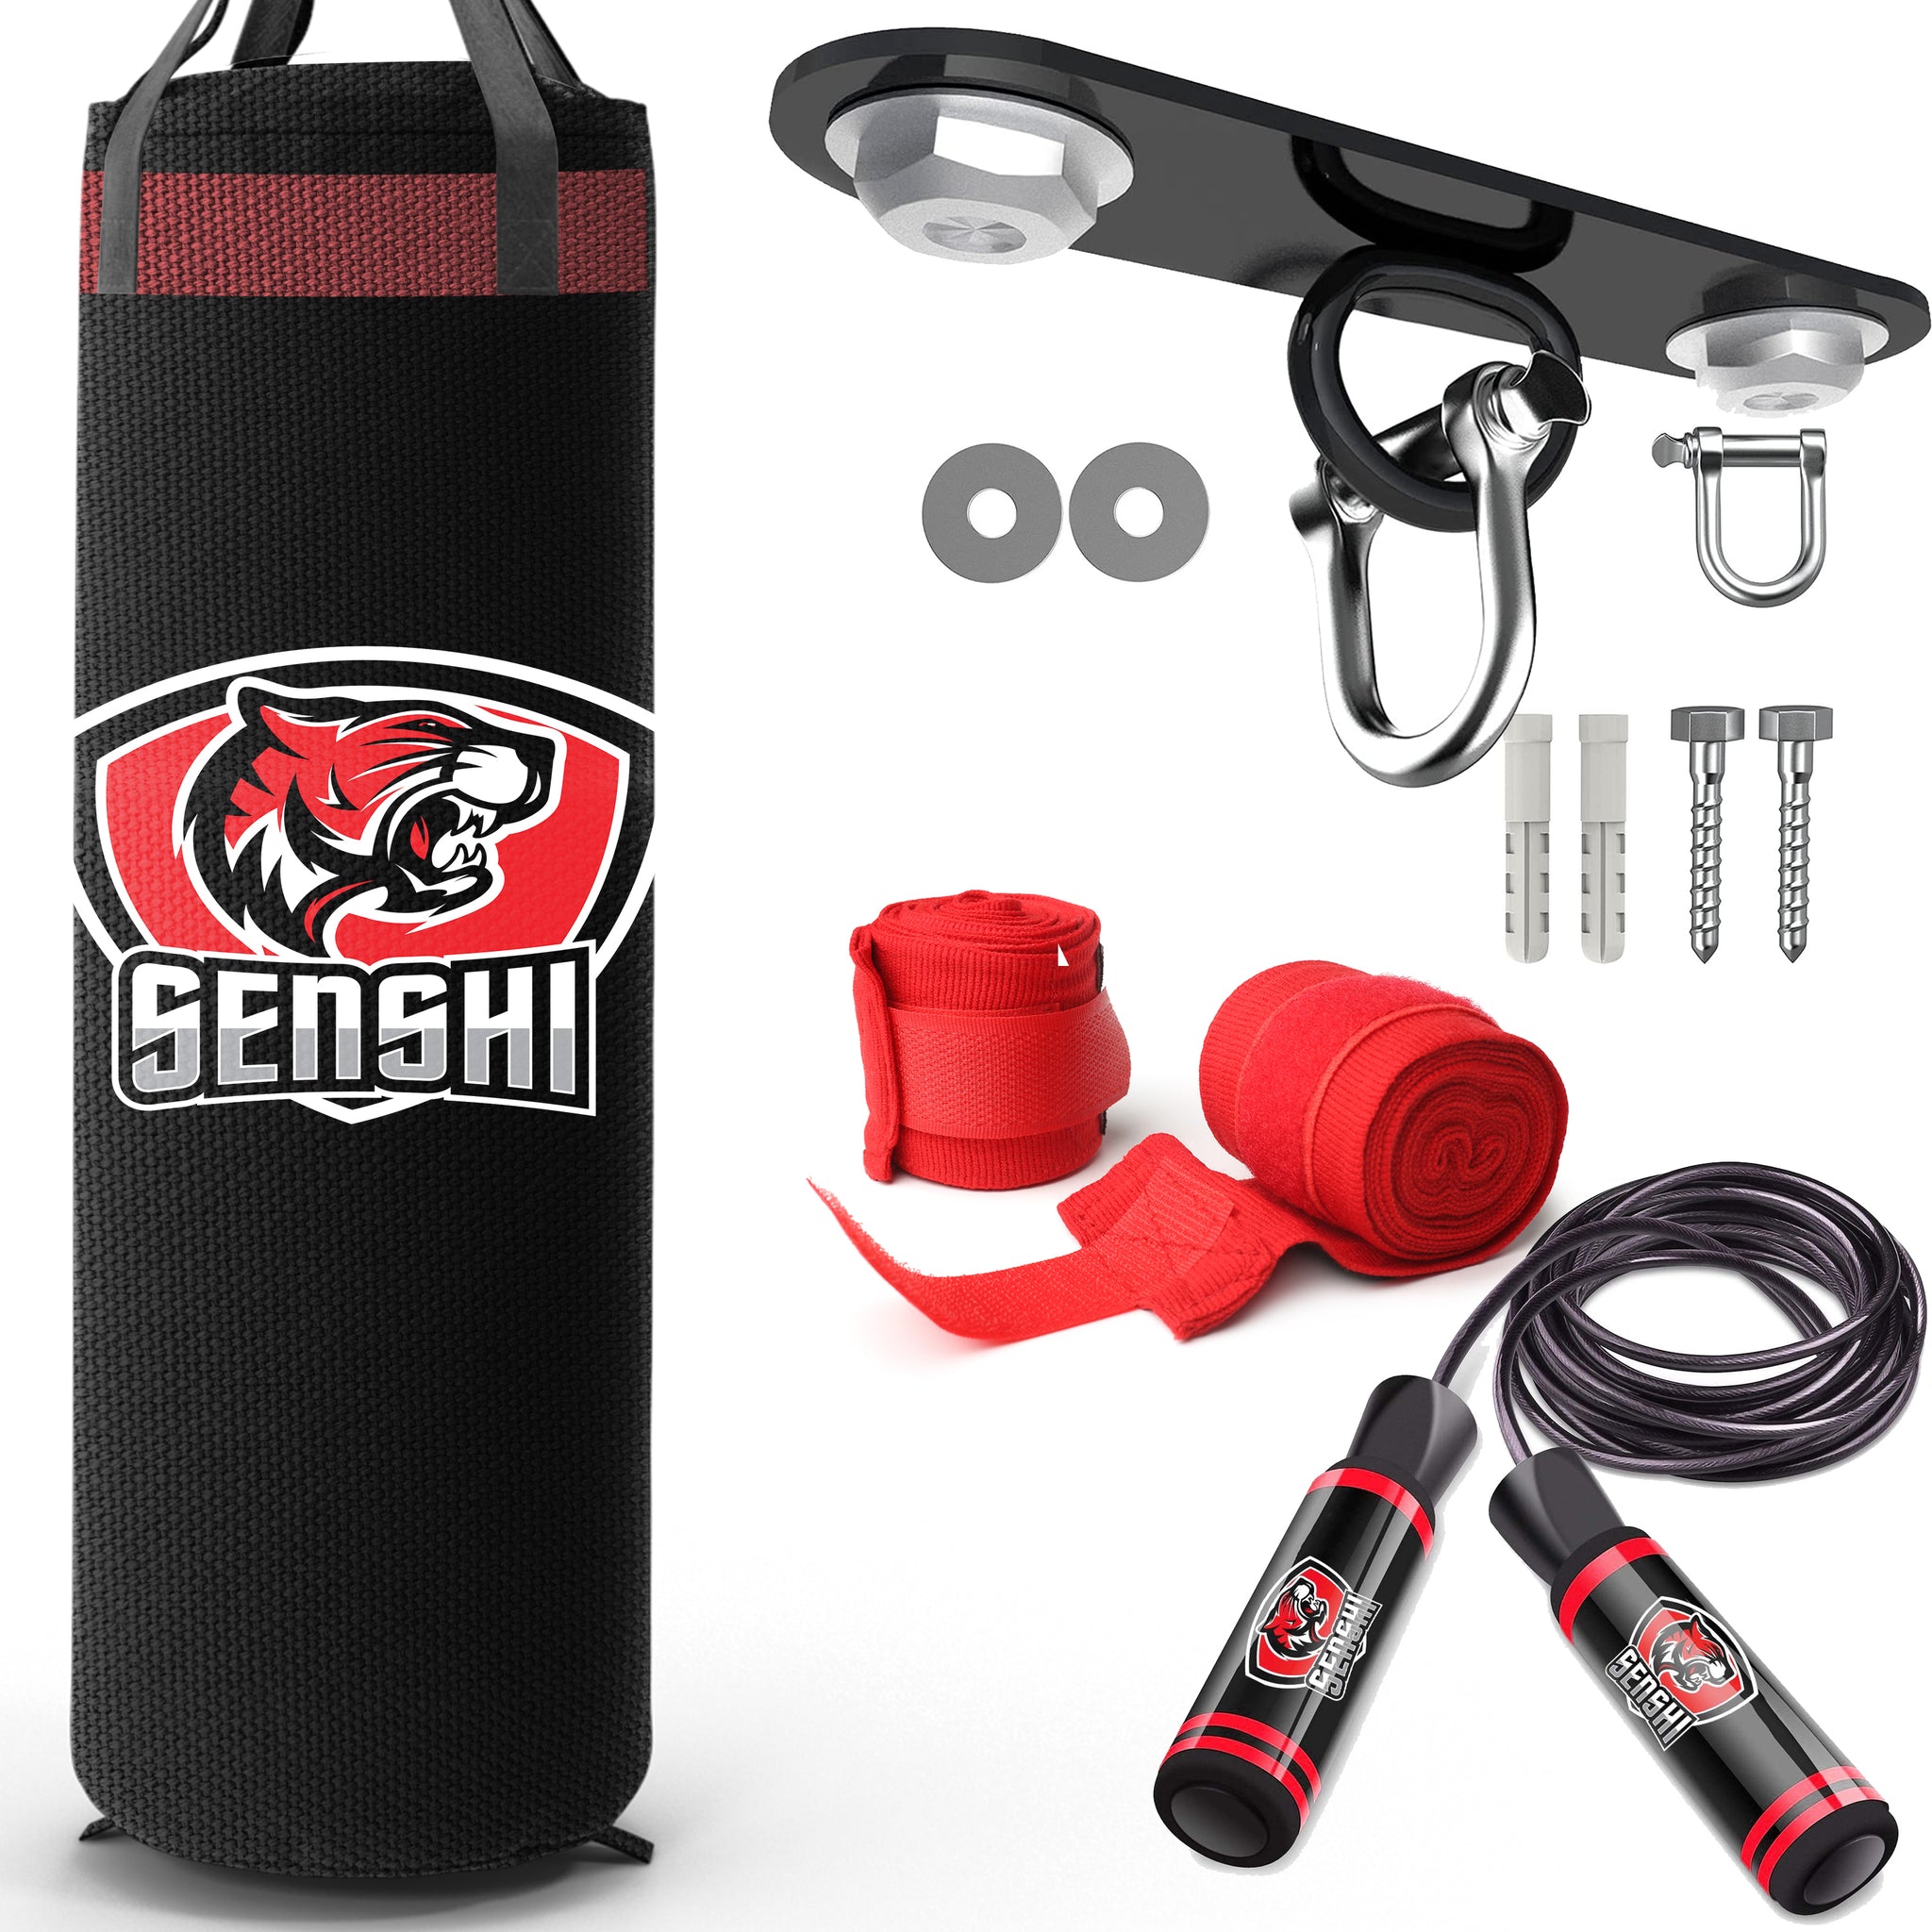 Amazon.com : Ringside 100-pound Leather Boxing Punching Heavy Bag (Filled)  : Heavy Punching Bags : Sports & Outdoors